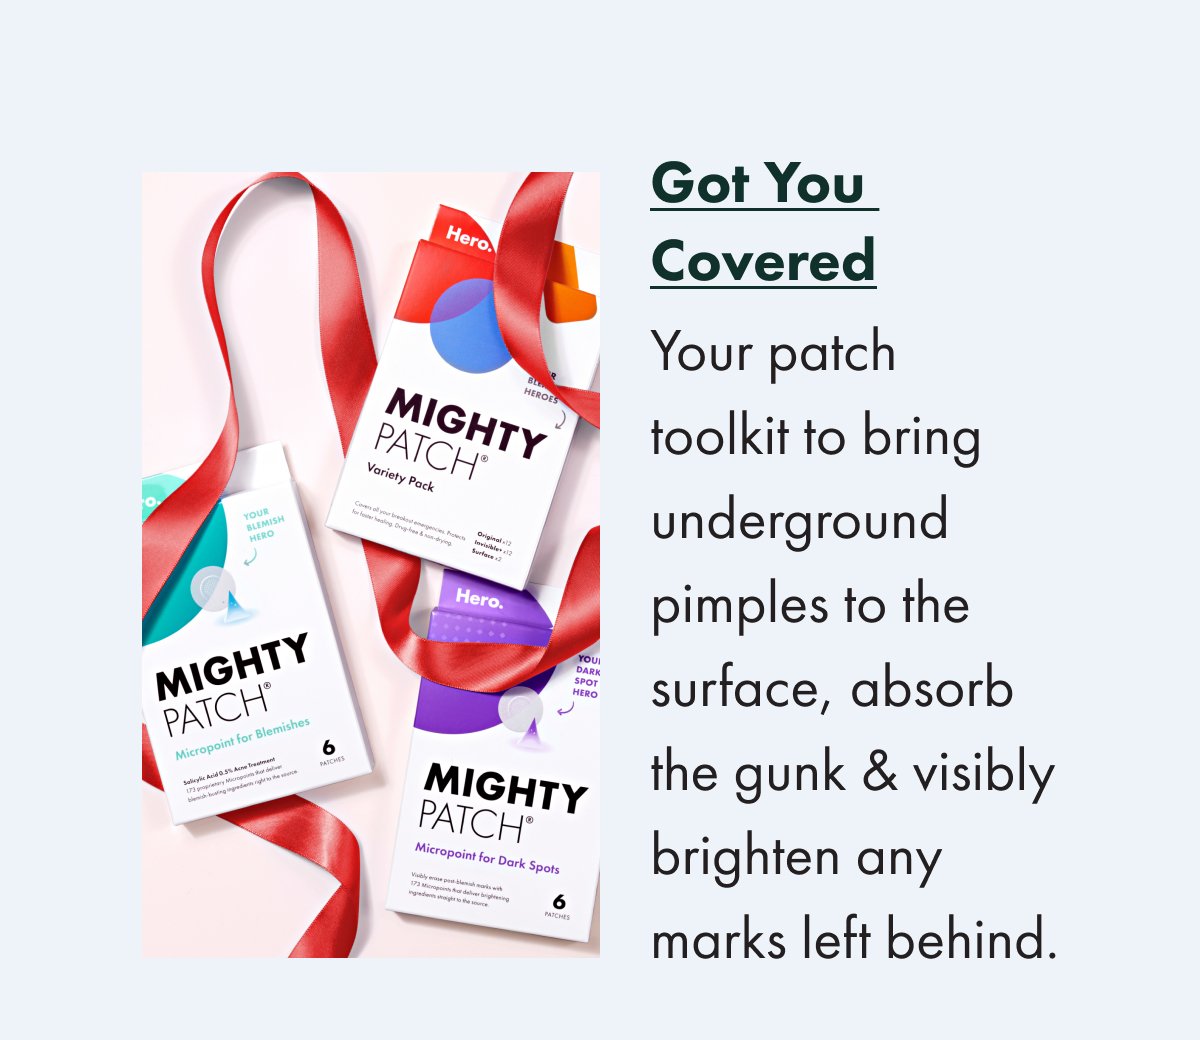 Got you covered kit product image.  Text "Your patch toolkit to bring underground pimples to the surface...""